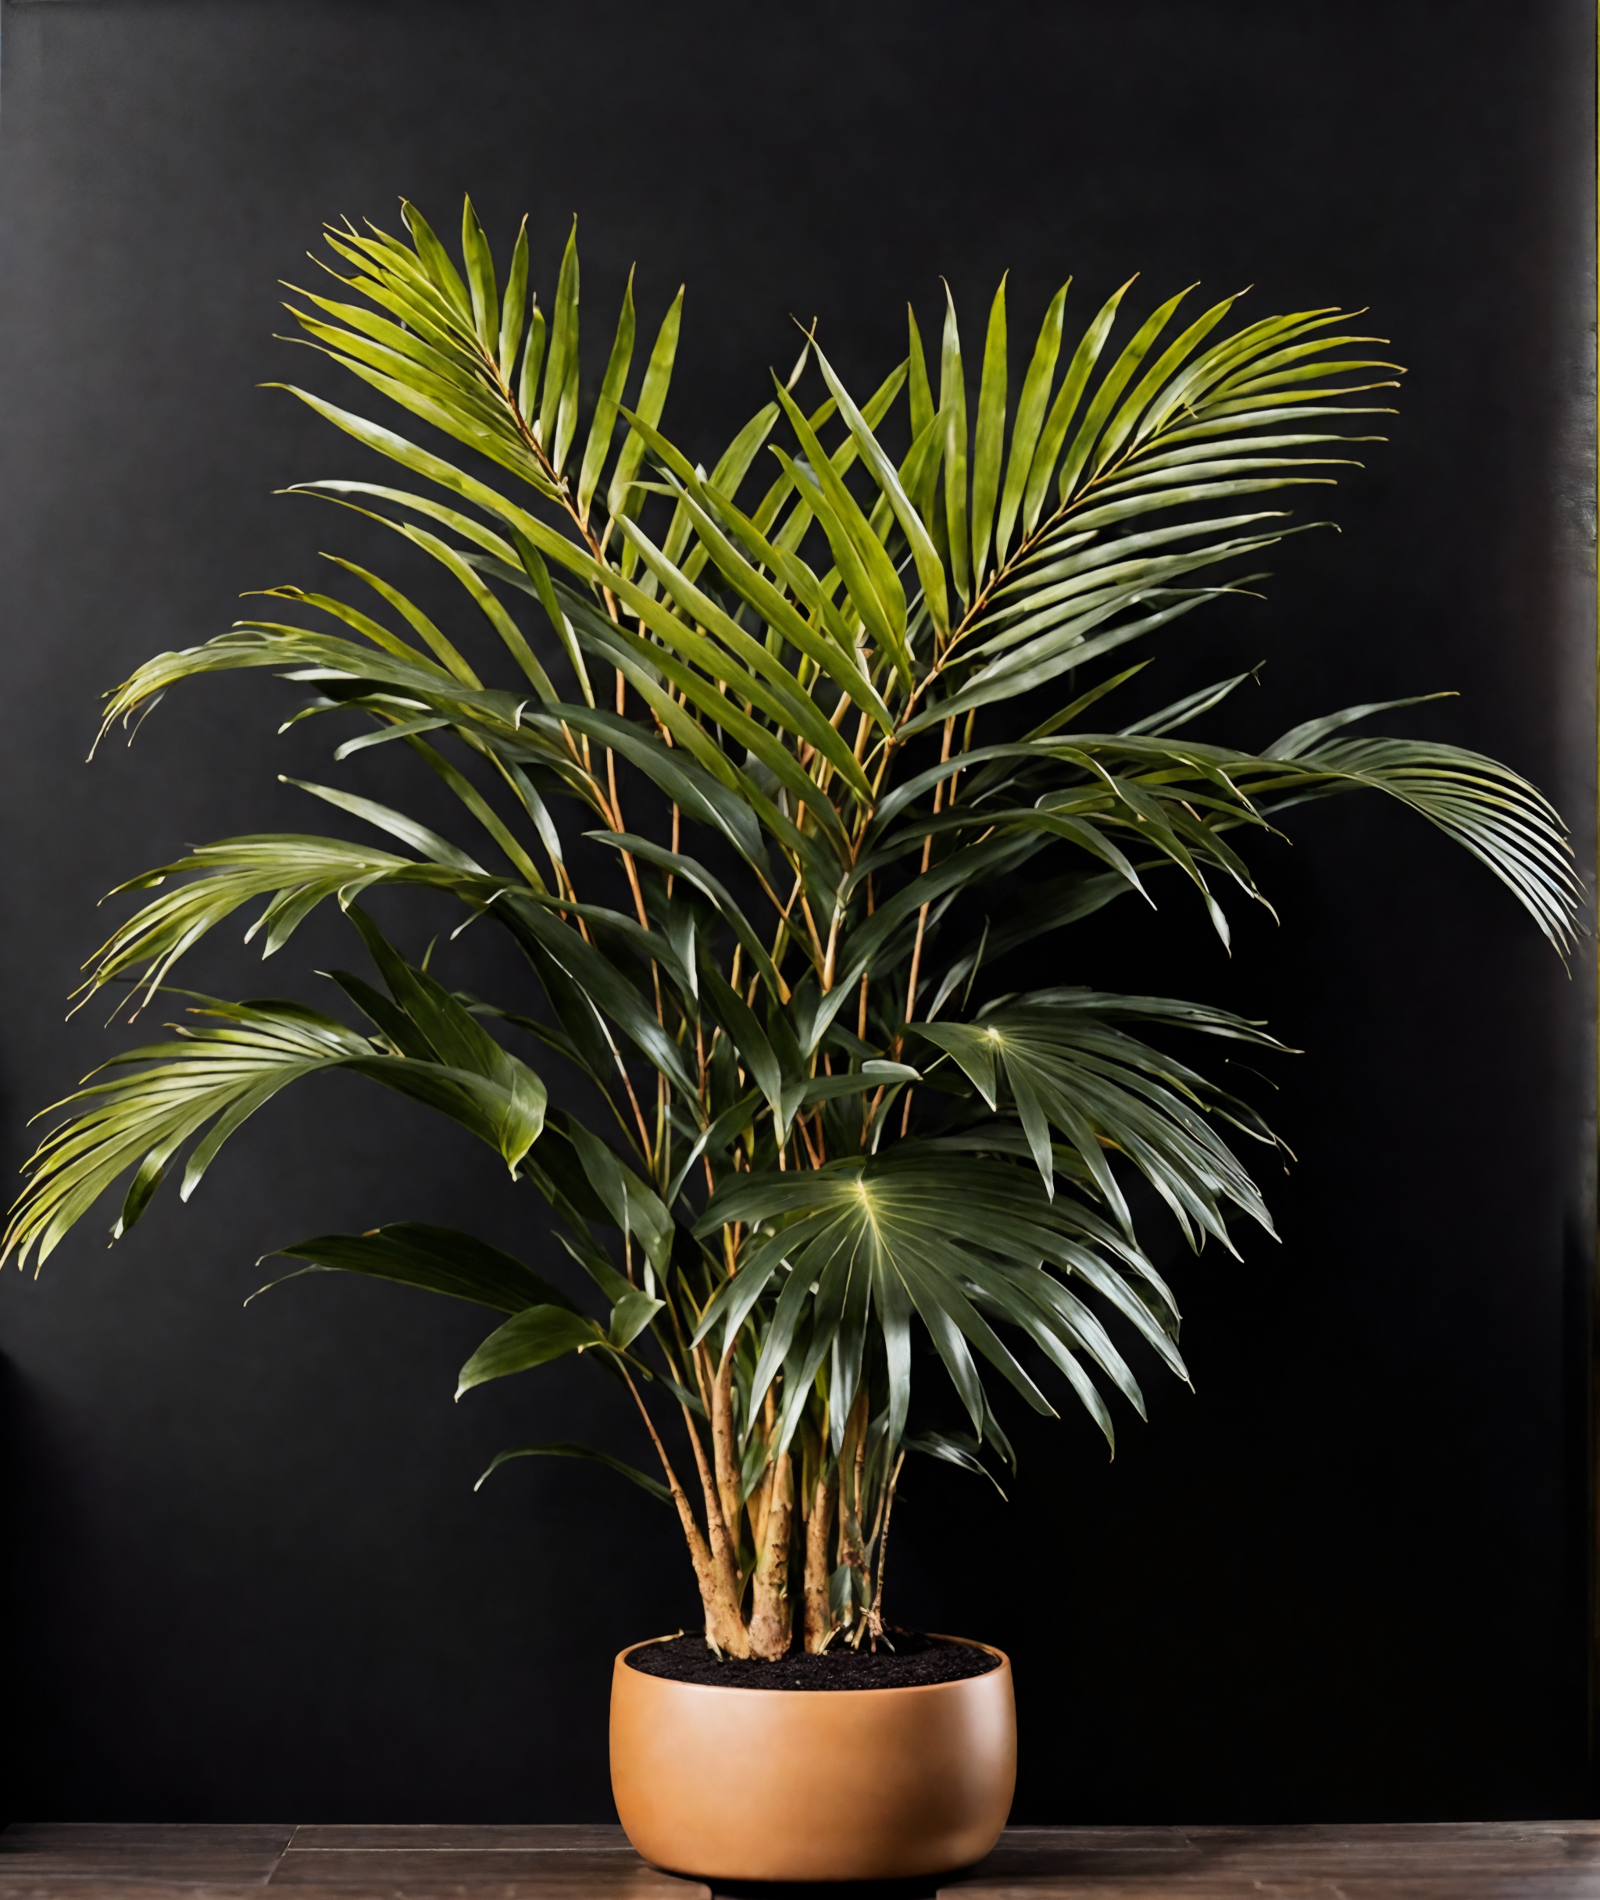 Howea forsteriana in a brown planter on a wooden table, with clear lighting and a dark background.